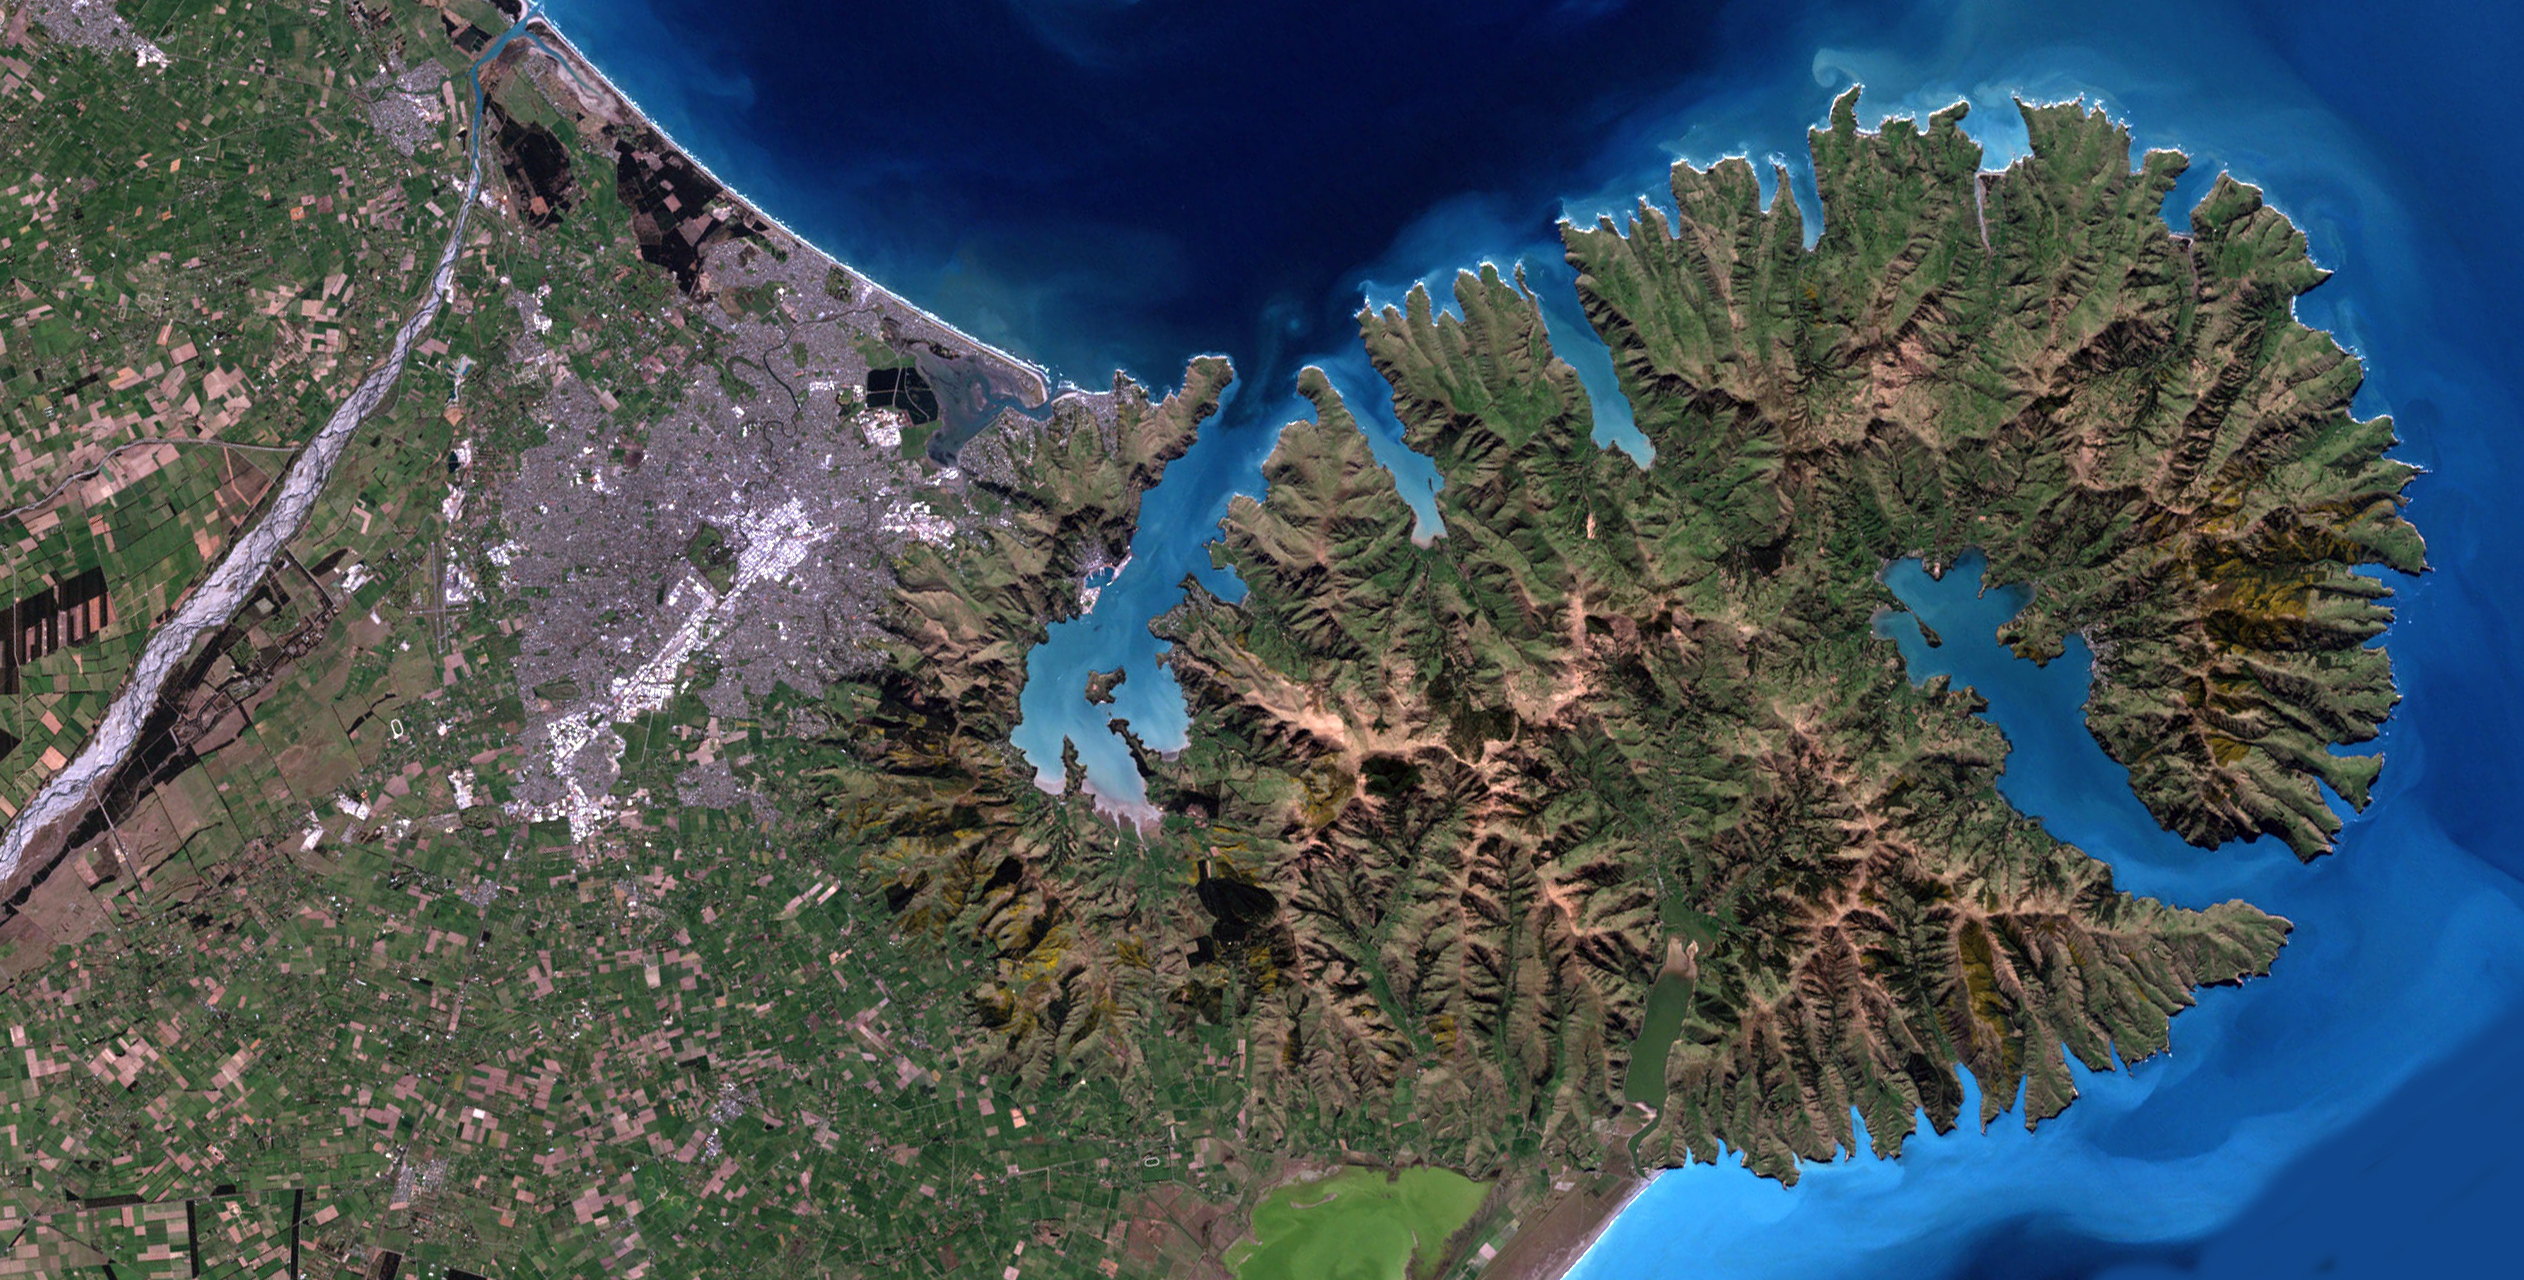  This satellite image shows Banks Peninsula, including Lyttelton Harbour and Akaroa Harbour, and the city of Christchurch, in Canterbury, New Zealand.